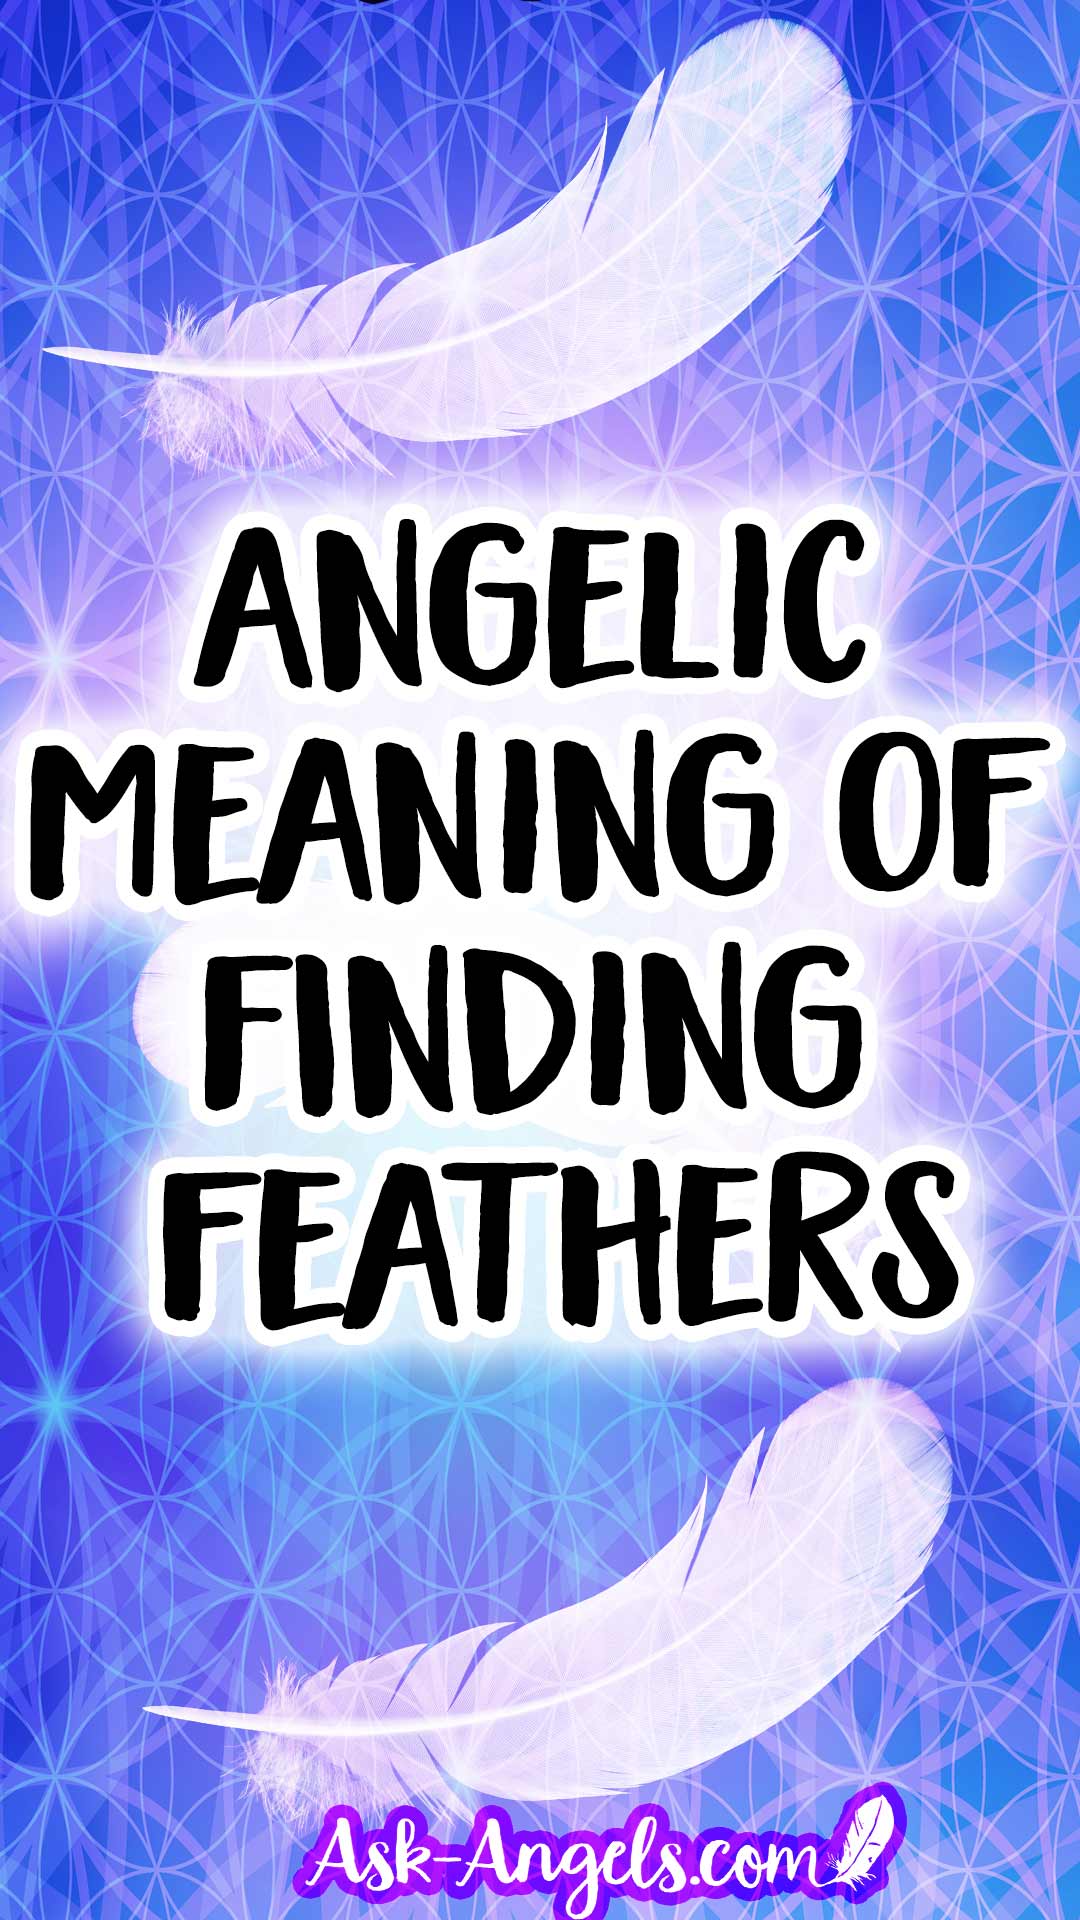 Angelic Meaning of Feathers